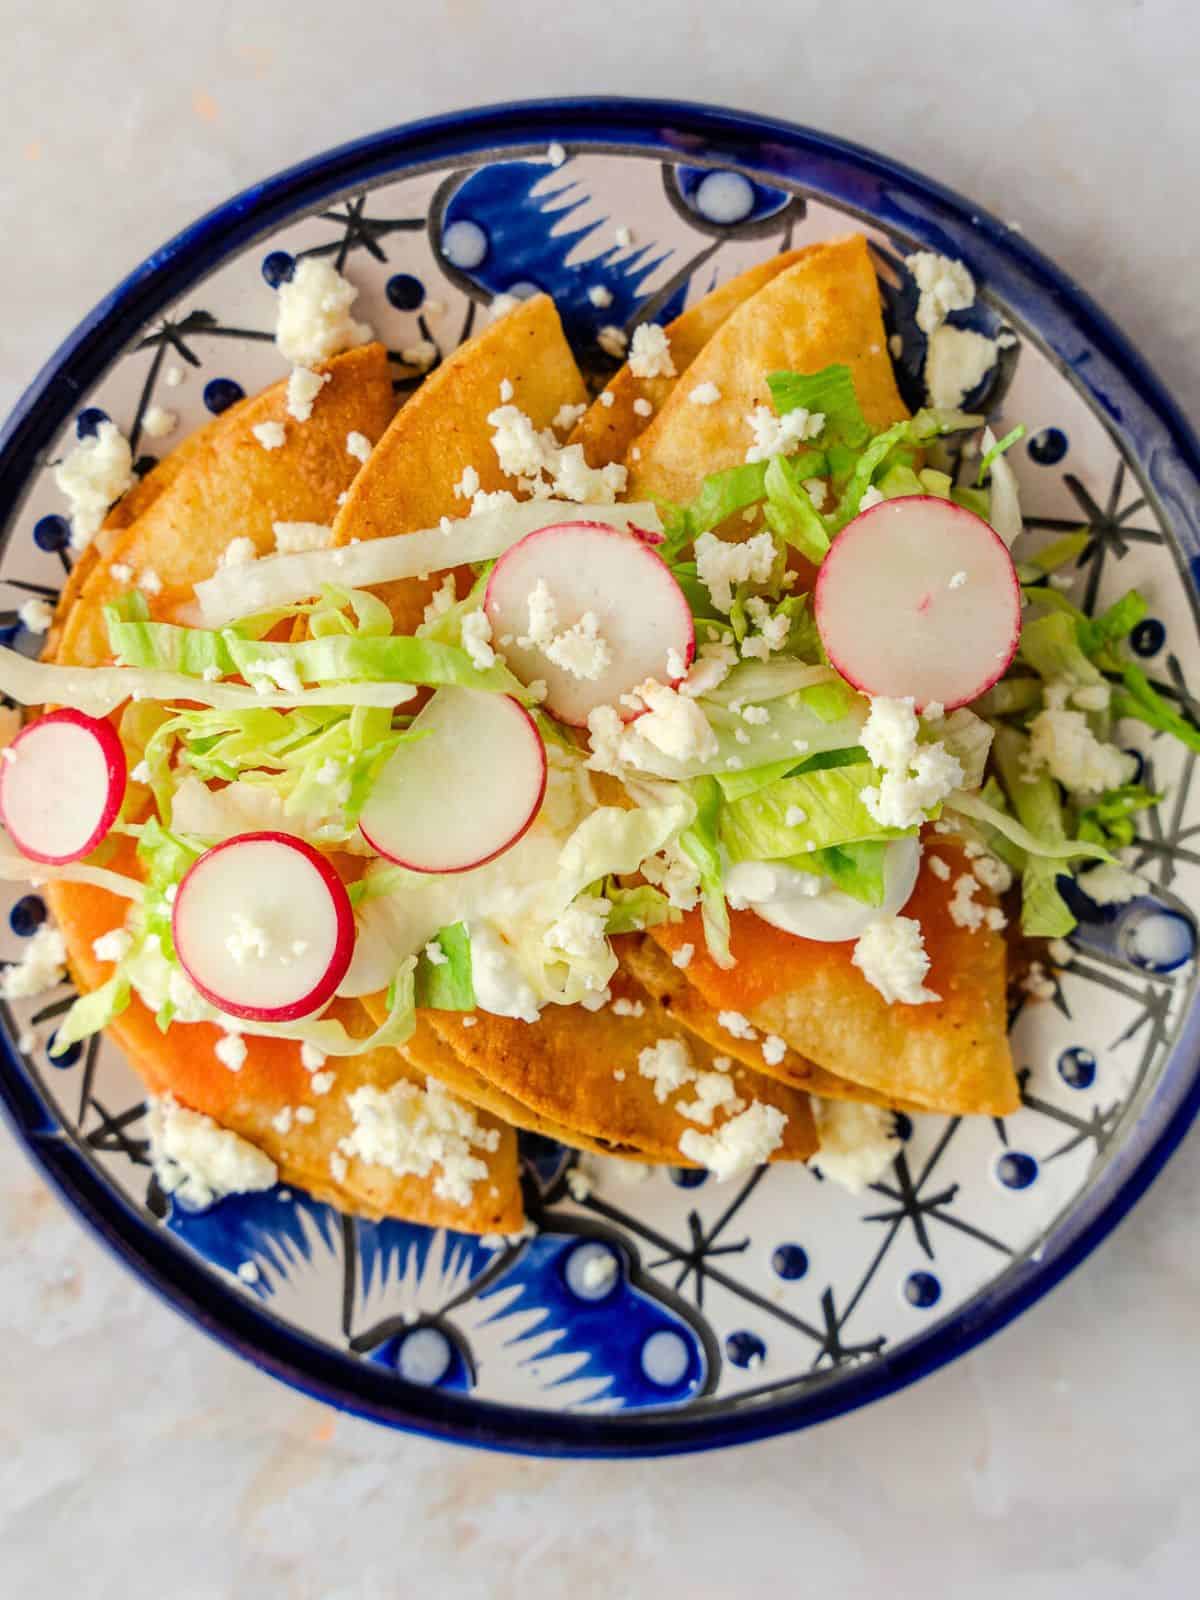 Tacos dorados on a blue plate with toppings.